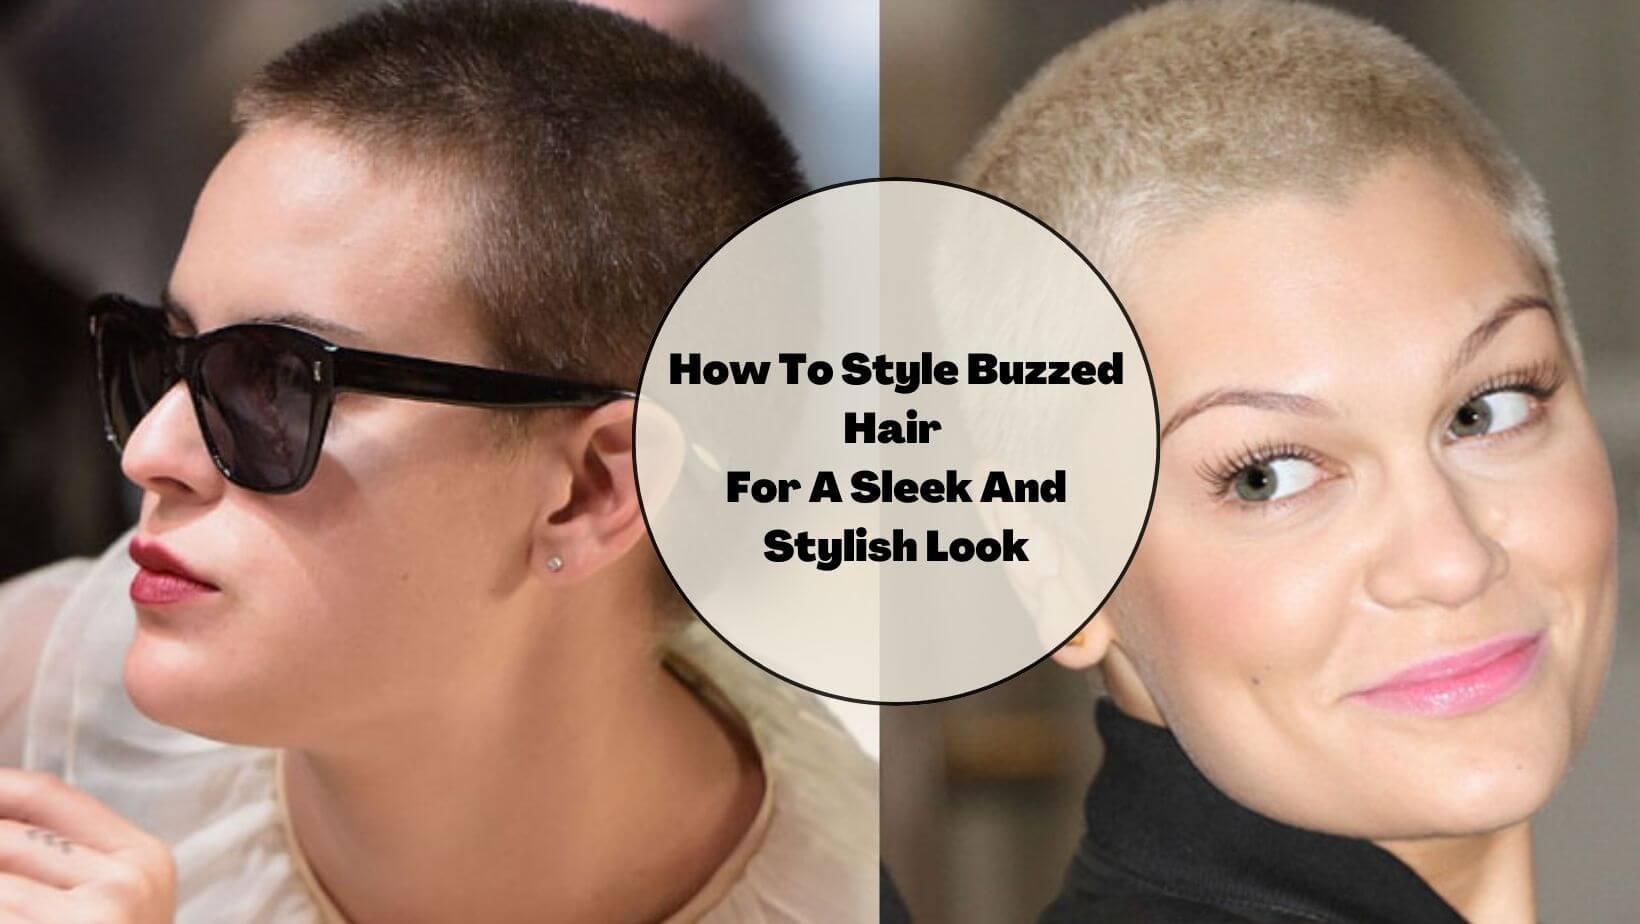 How To Style Buzzed Hair